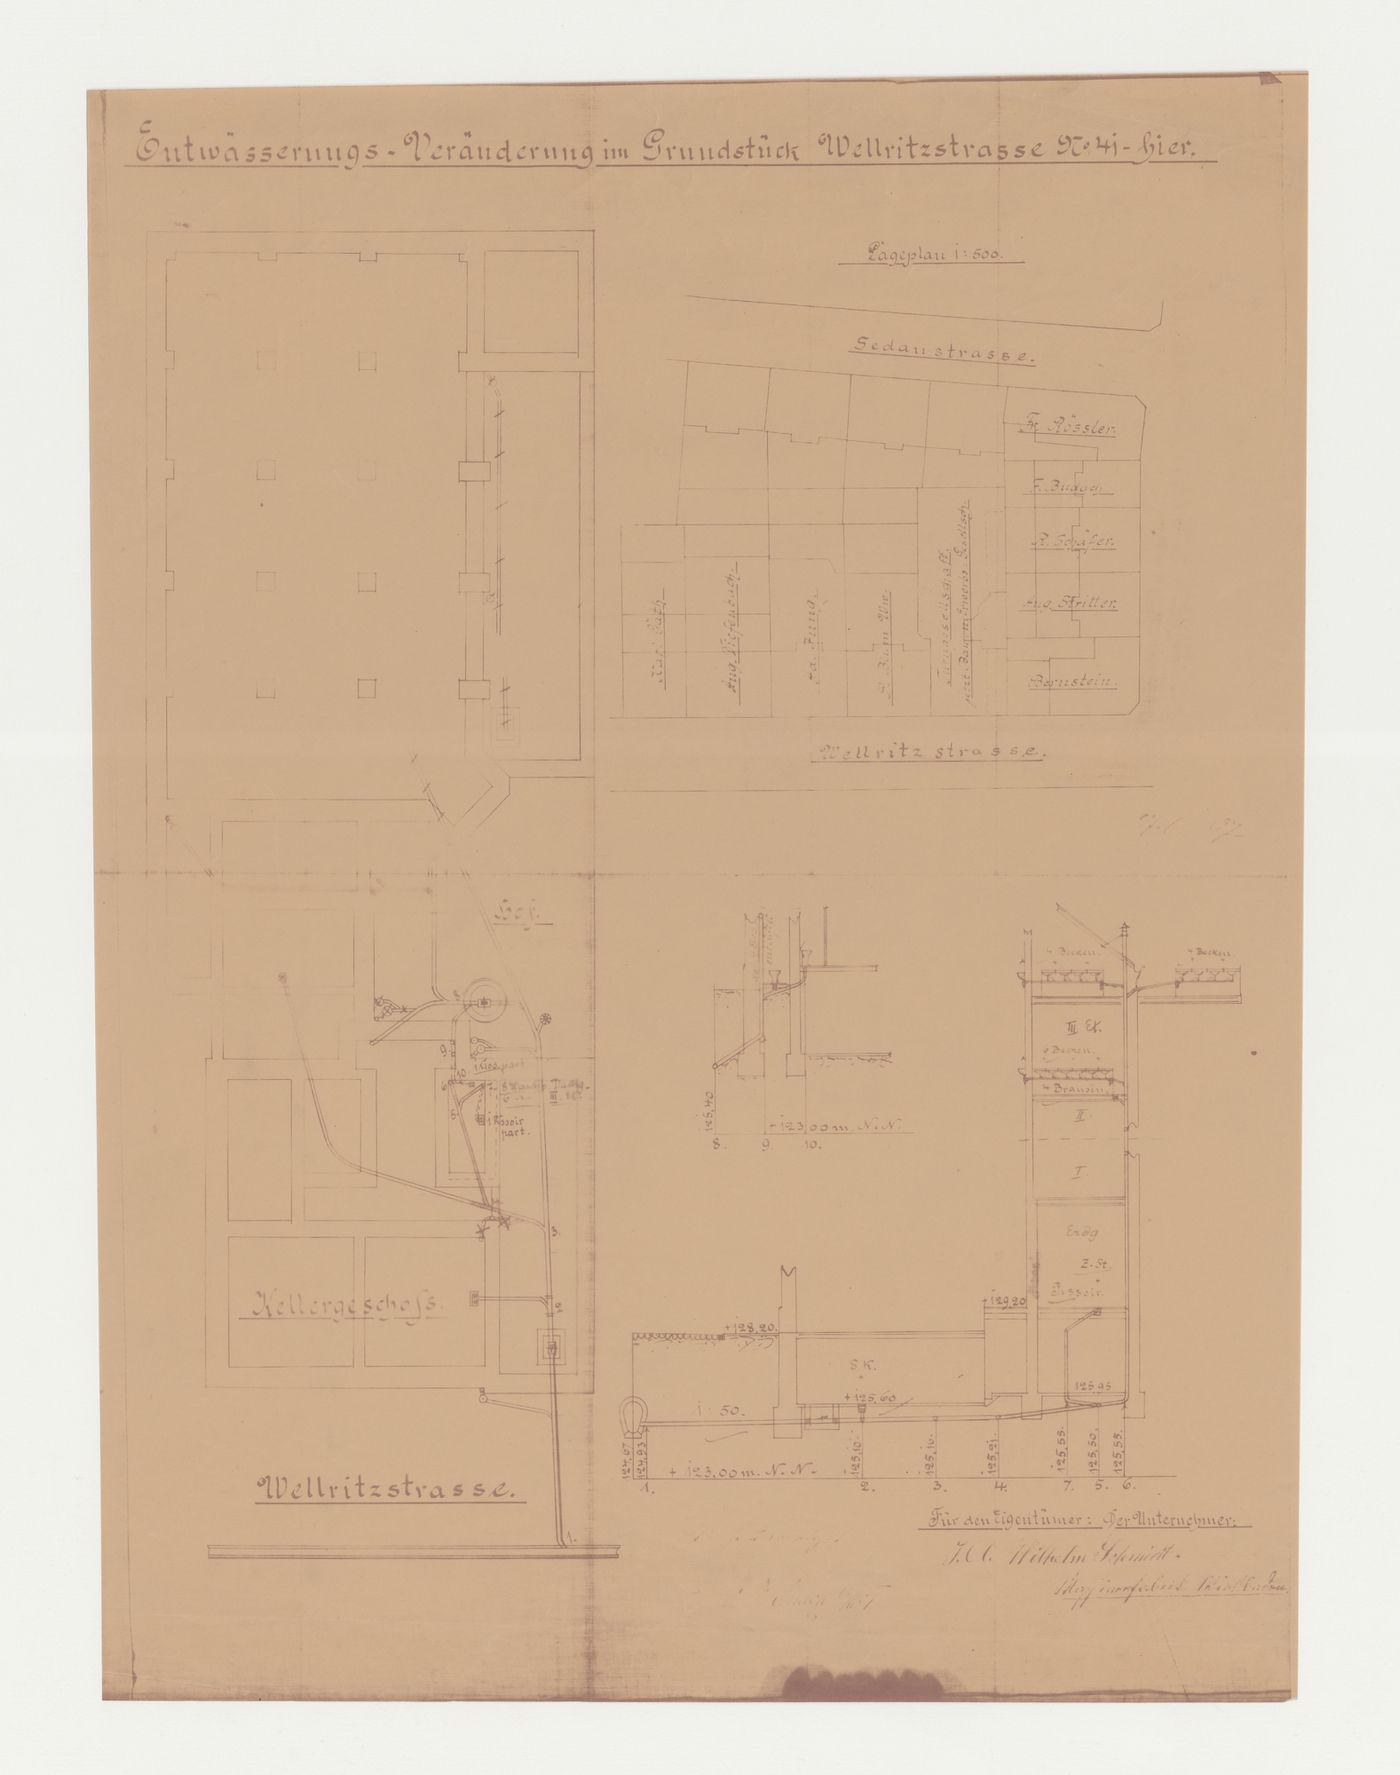 Site plan, plans and sections showing sanitary drainage systems, possibly for a housing estate, Wellritzstrasse, Wiesbaden, Germany